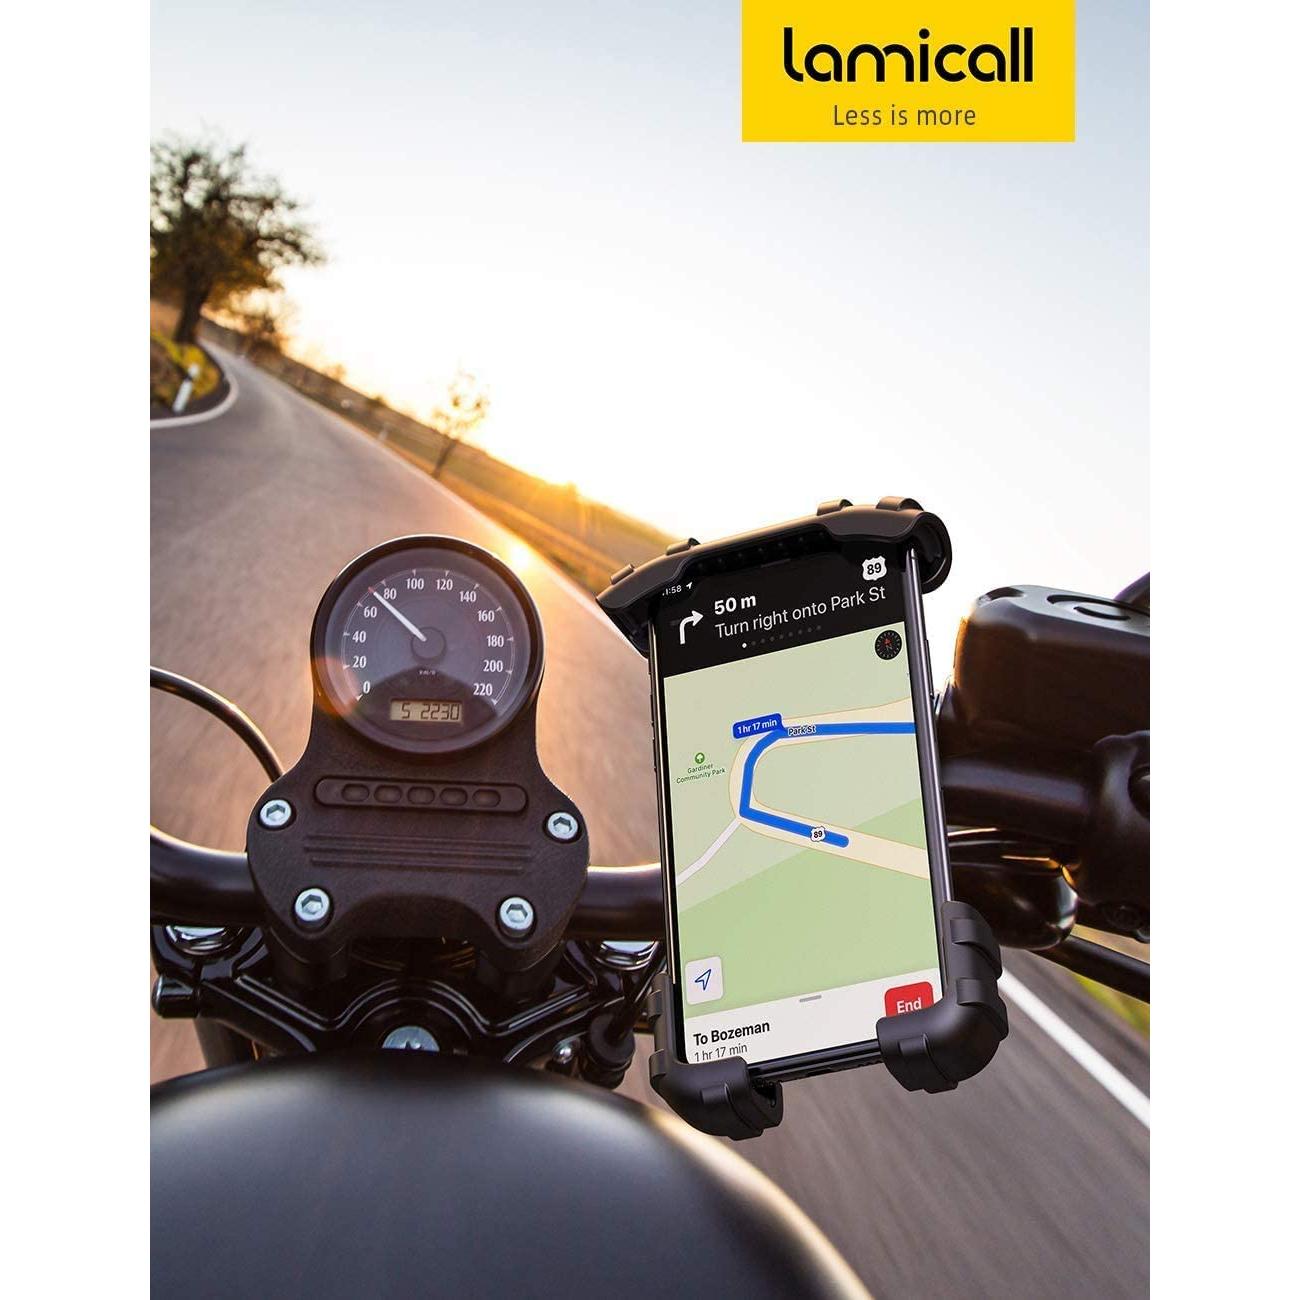 Bike Phone Mount, Motorcycle Phone Holder - Lamicall Motorcycle Bicycle Cell Phone Mount Clamp for Handlebar, Cycling Motorcycle Accessory